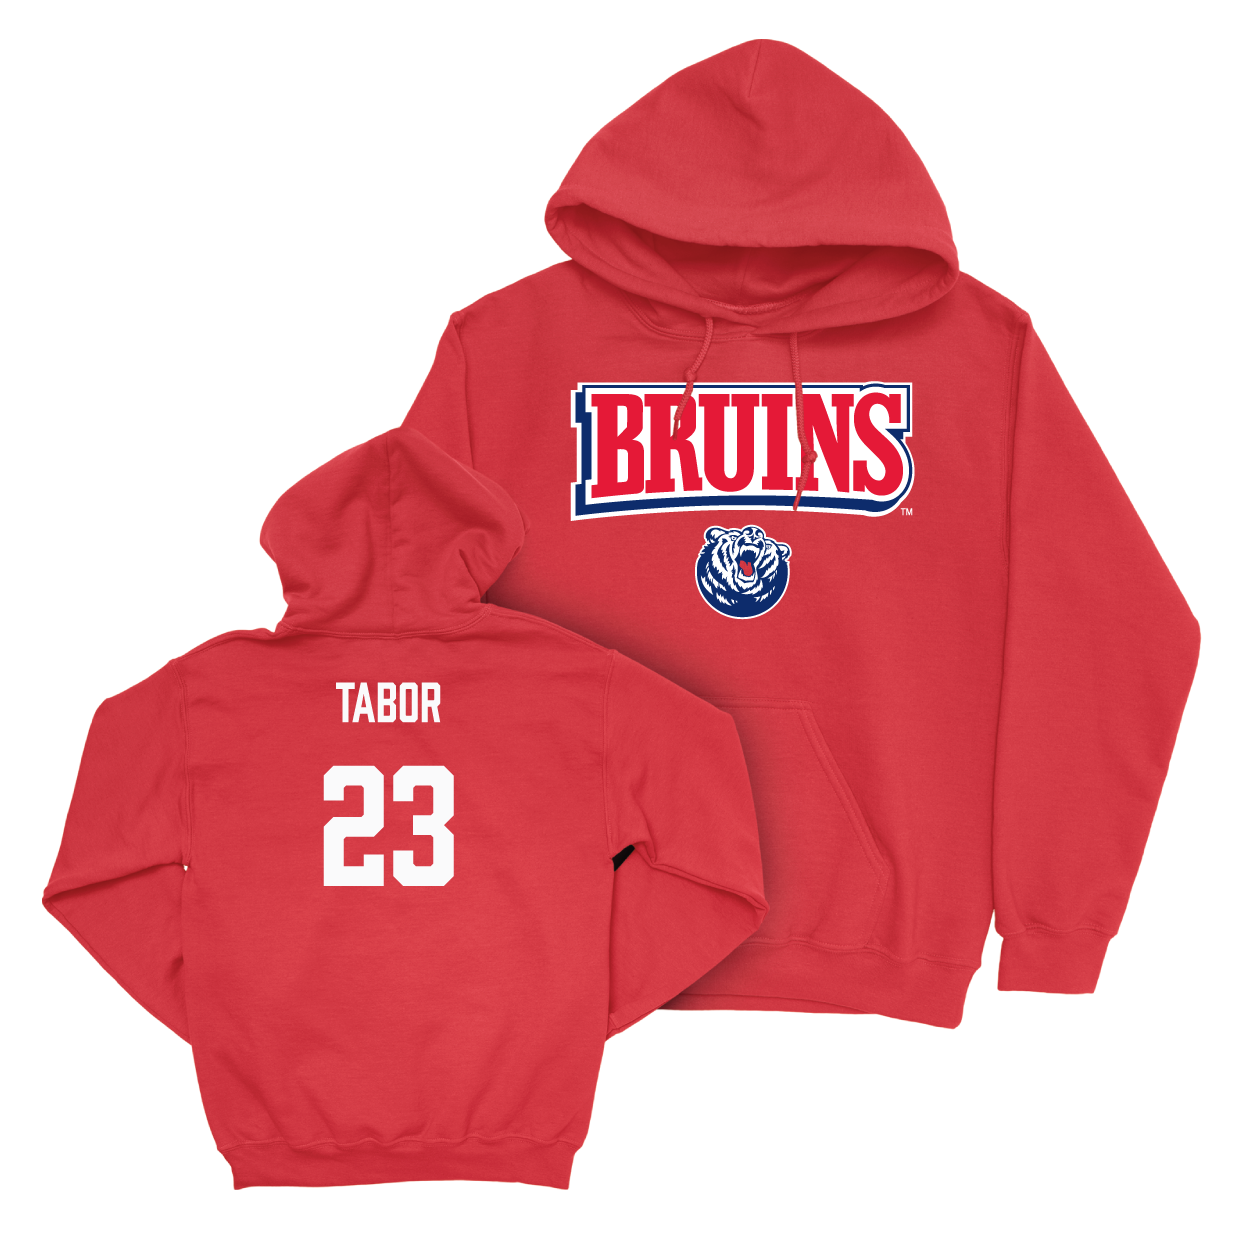 Belmont Women's Soccer Red Bruins Hoodie - Lillie Tabor Small